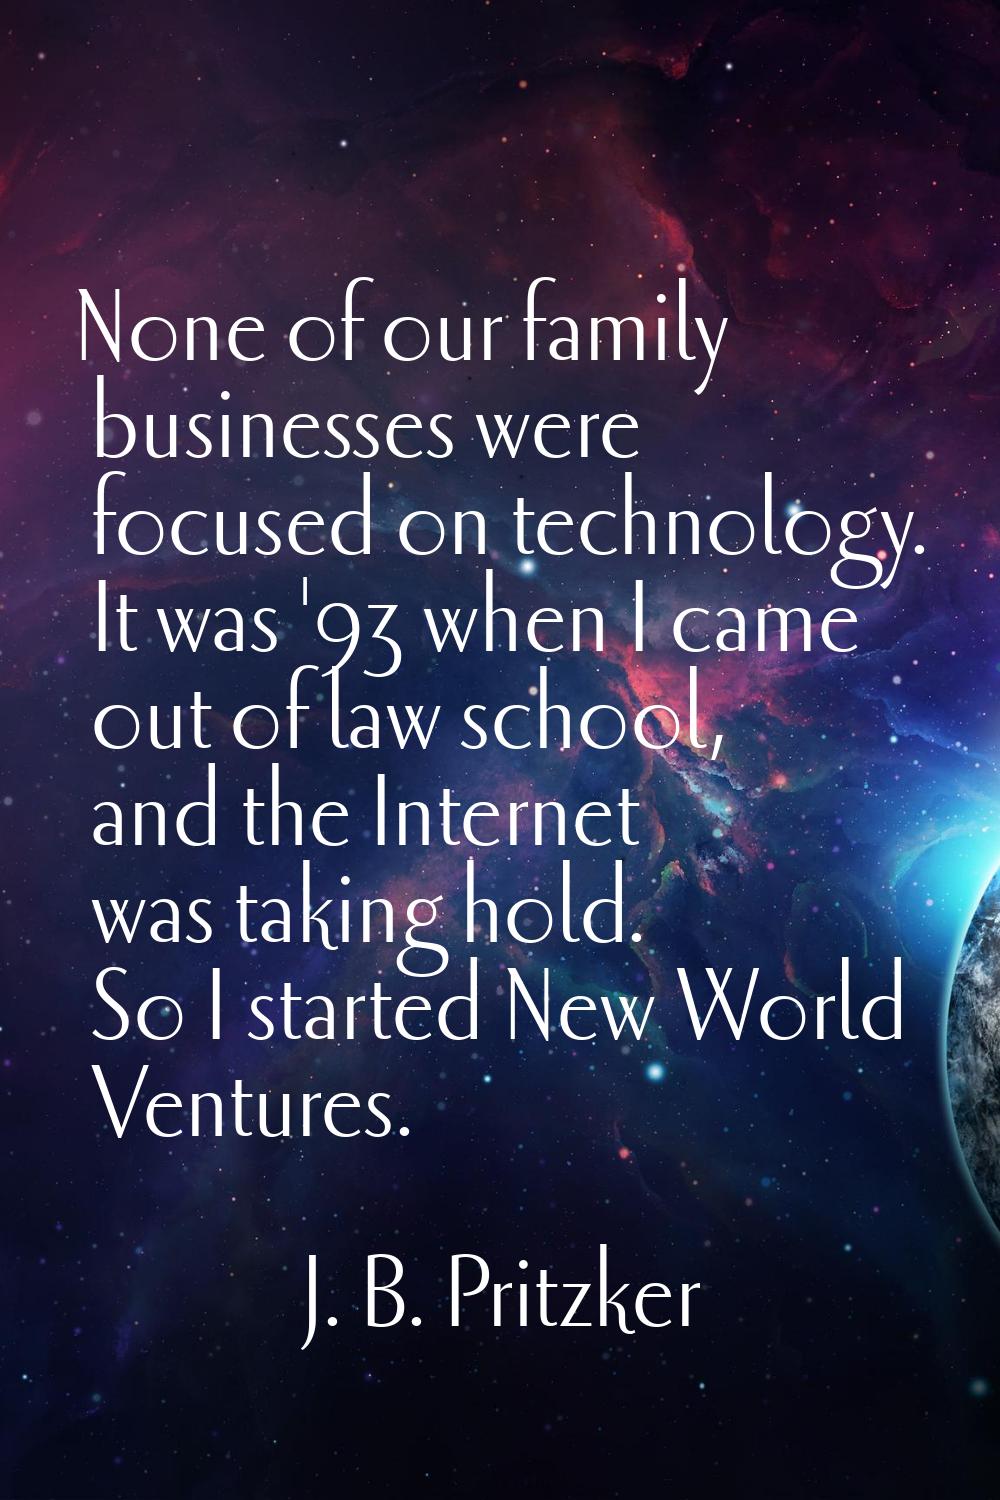 None of our family businesses were focused on technology. It was '93 when I came out of law school,